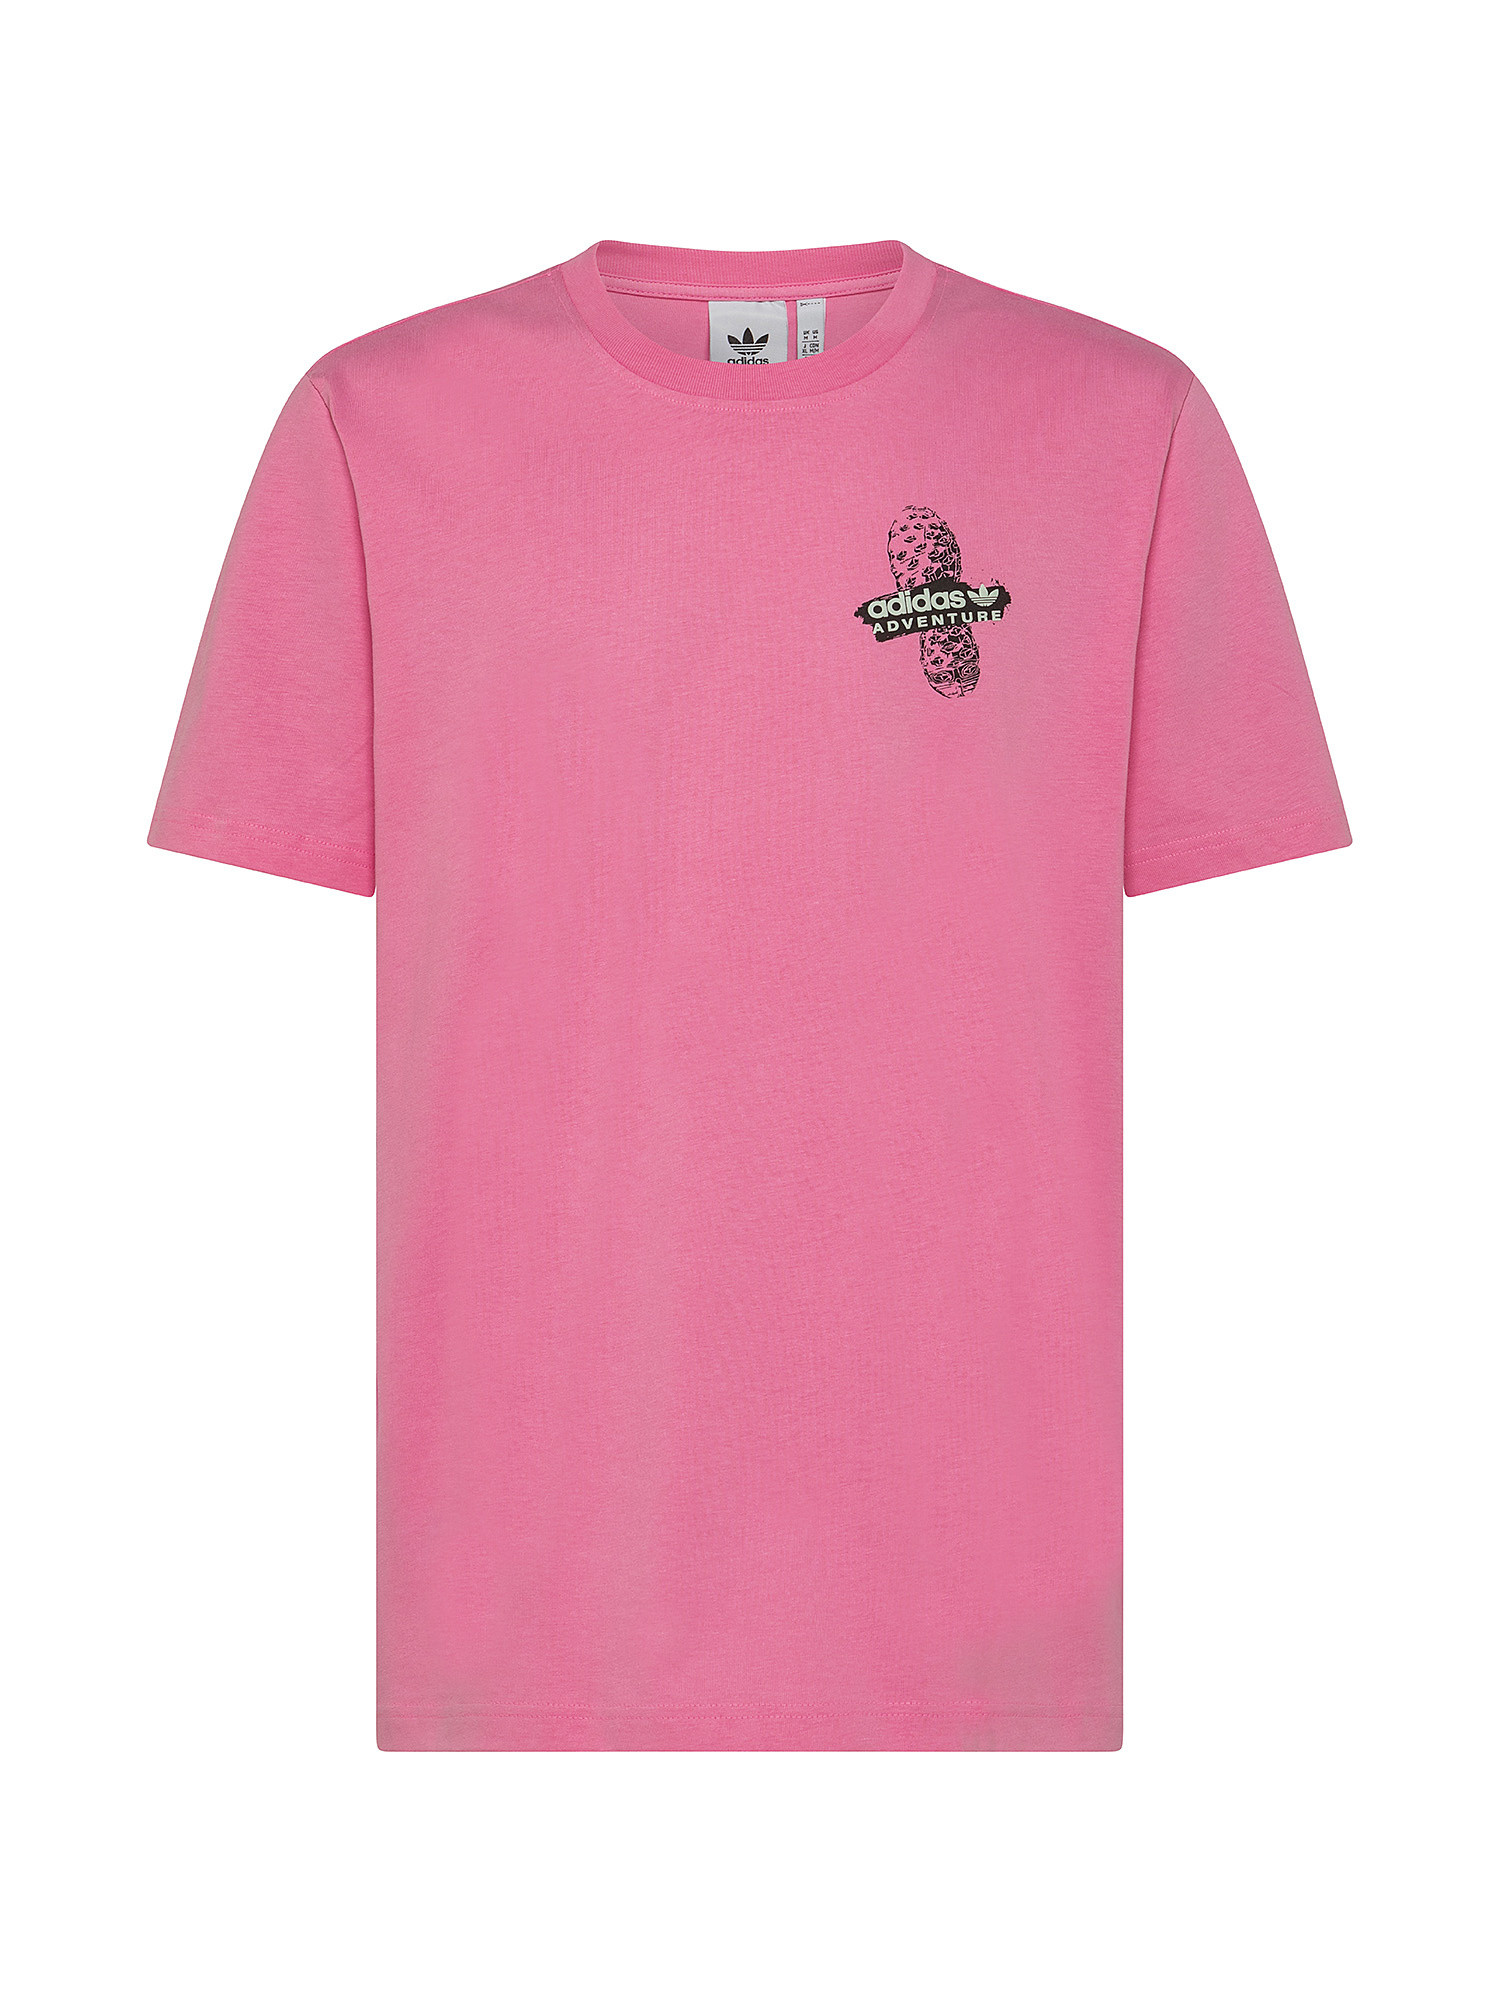 Adidas - Adventure trail T-shirt, Pink, large image number 0